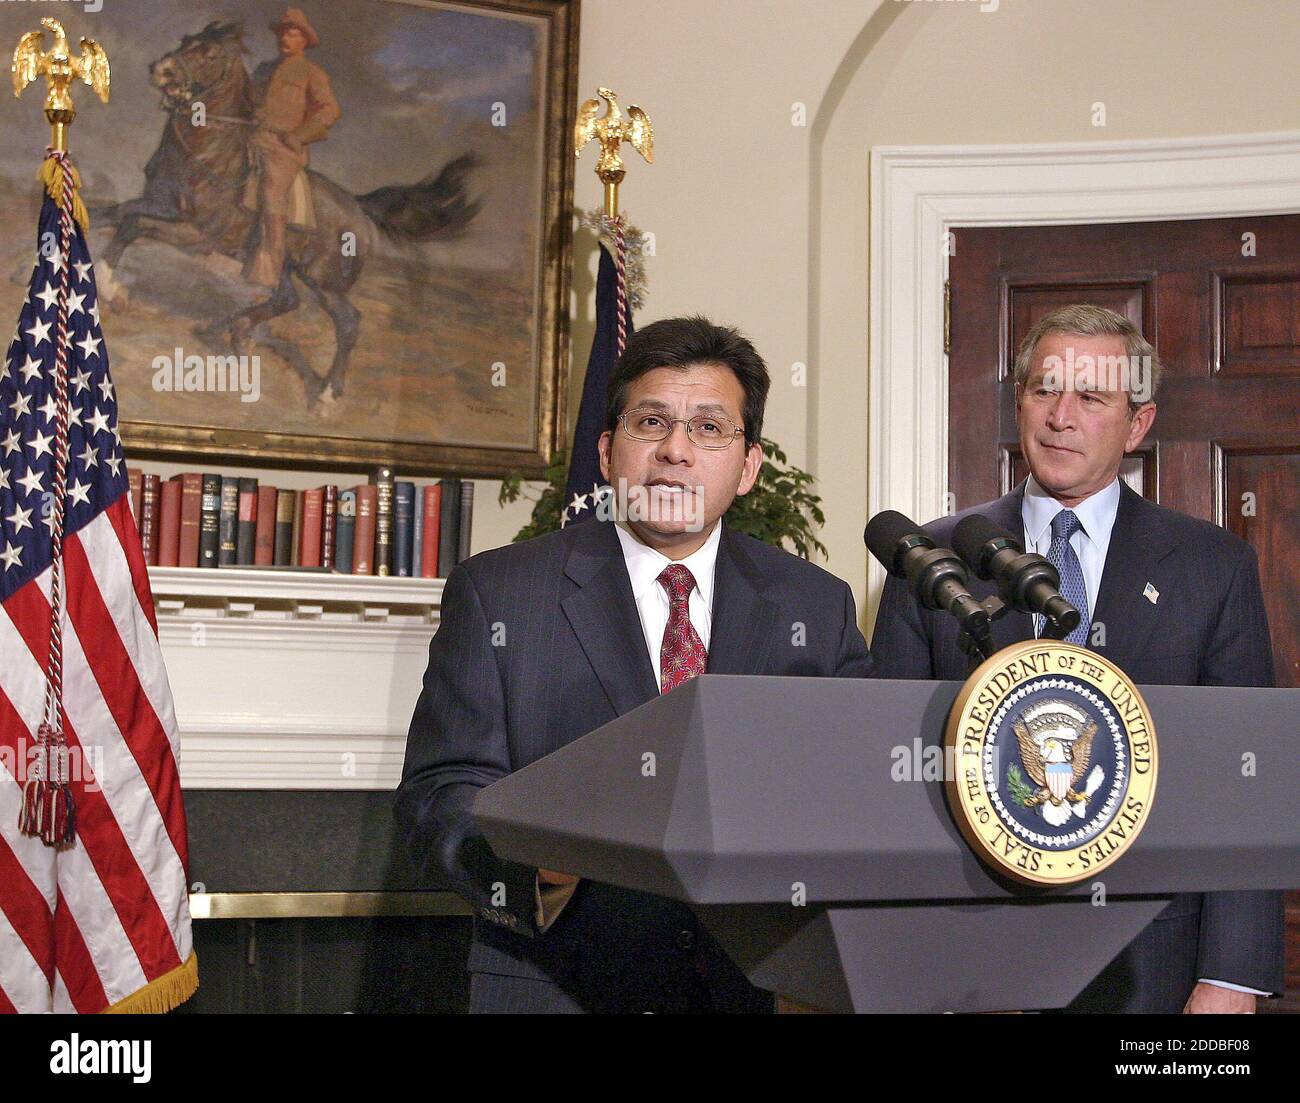 NO FILM, NO VIDEO, NO TV, NO DOCUMENTARY - White Counsel Alberto Gonzales, left, speaks to the media after being nominated by President George W. Bush, right, to fill the spot of U.S. Attorney General to replace John Ashcroft. (gsb) 2004. Photo by Chuck Kennedy/KRT/ABACA. Stock Photo